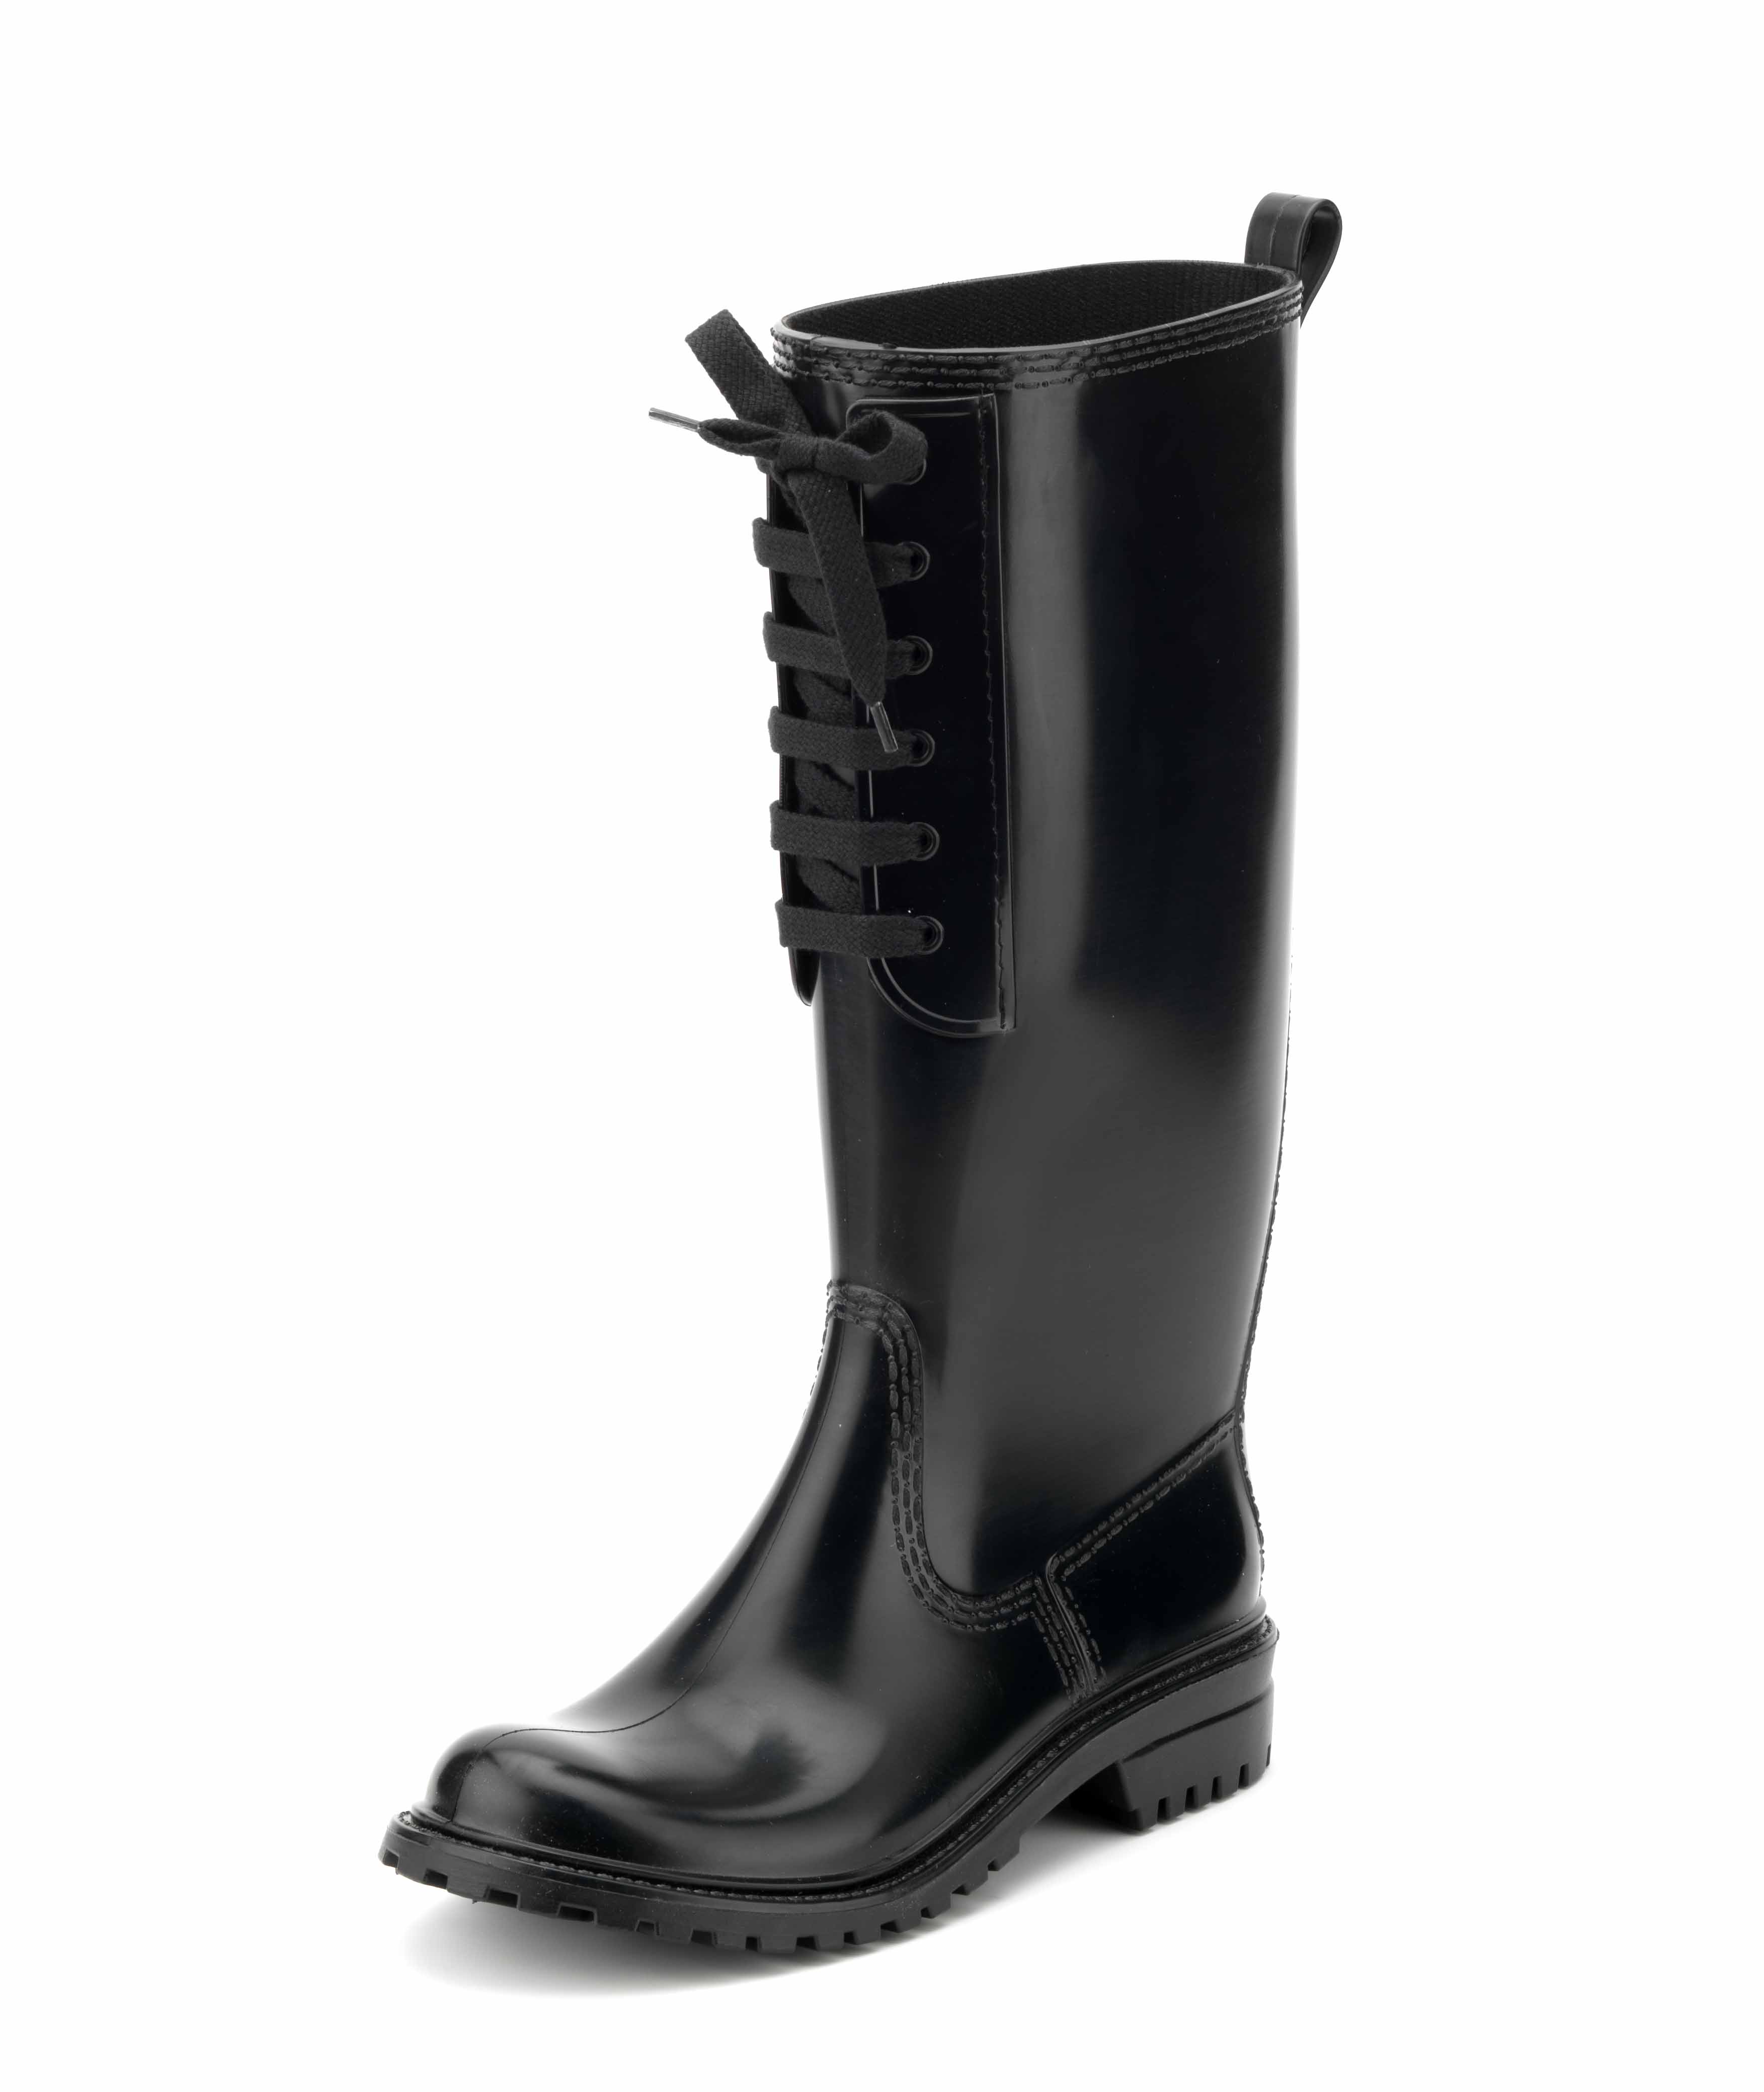 Pvc front lace-effect insert with flat tie, stitched on pvc countri boot model